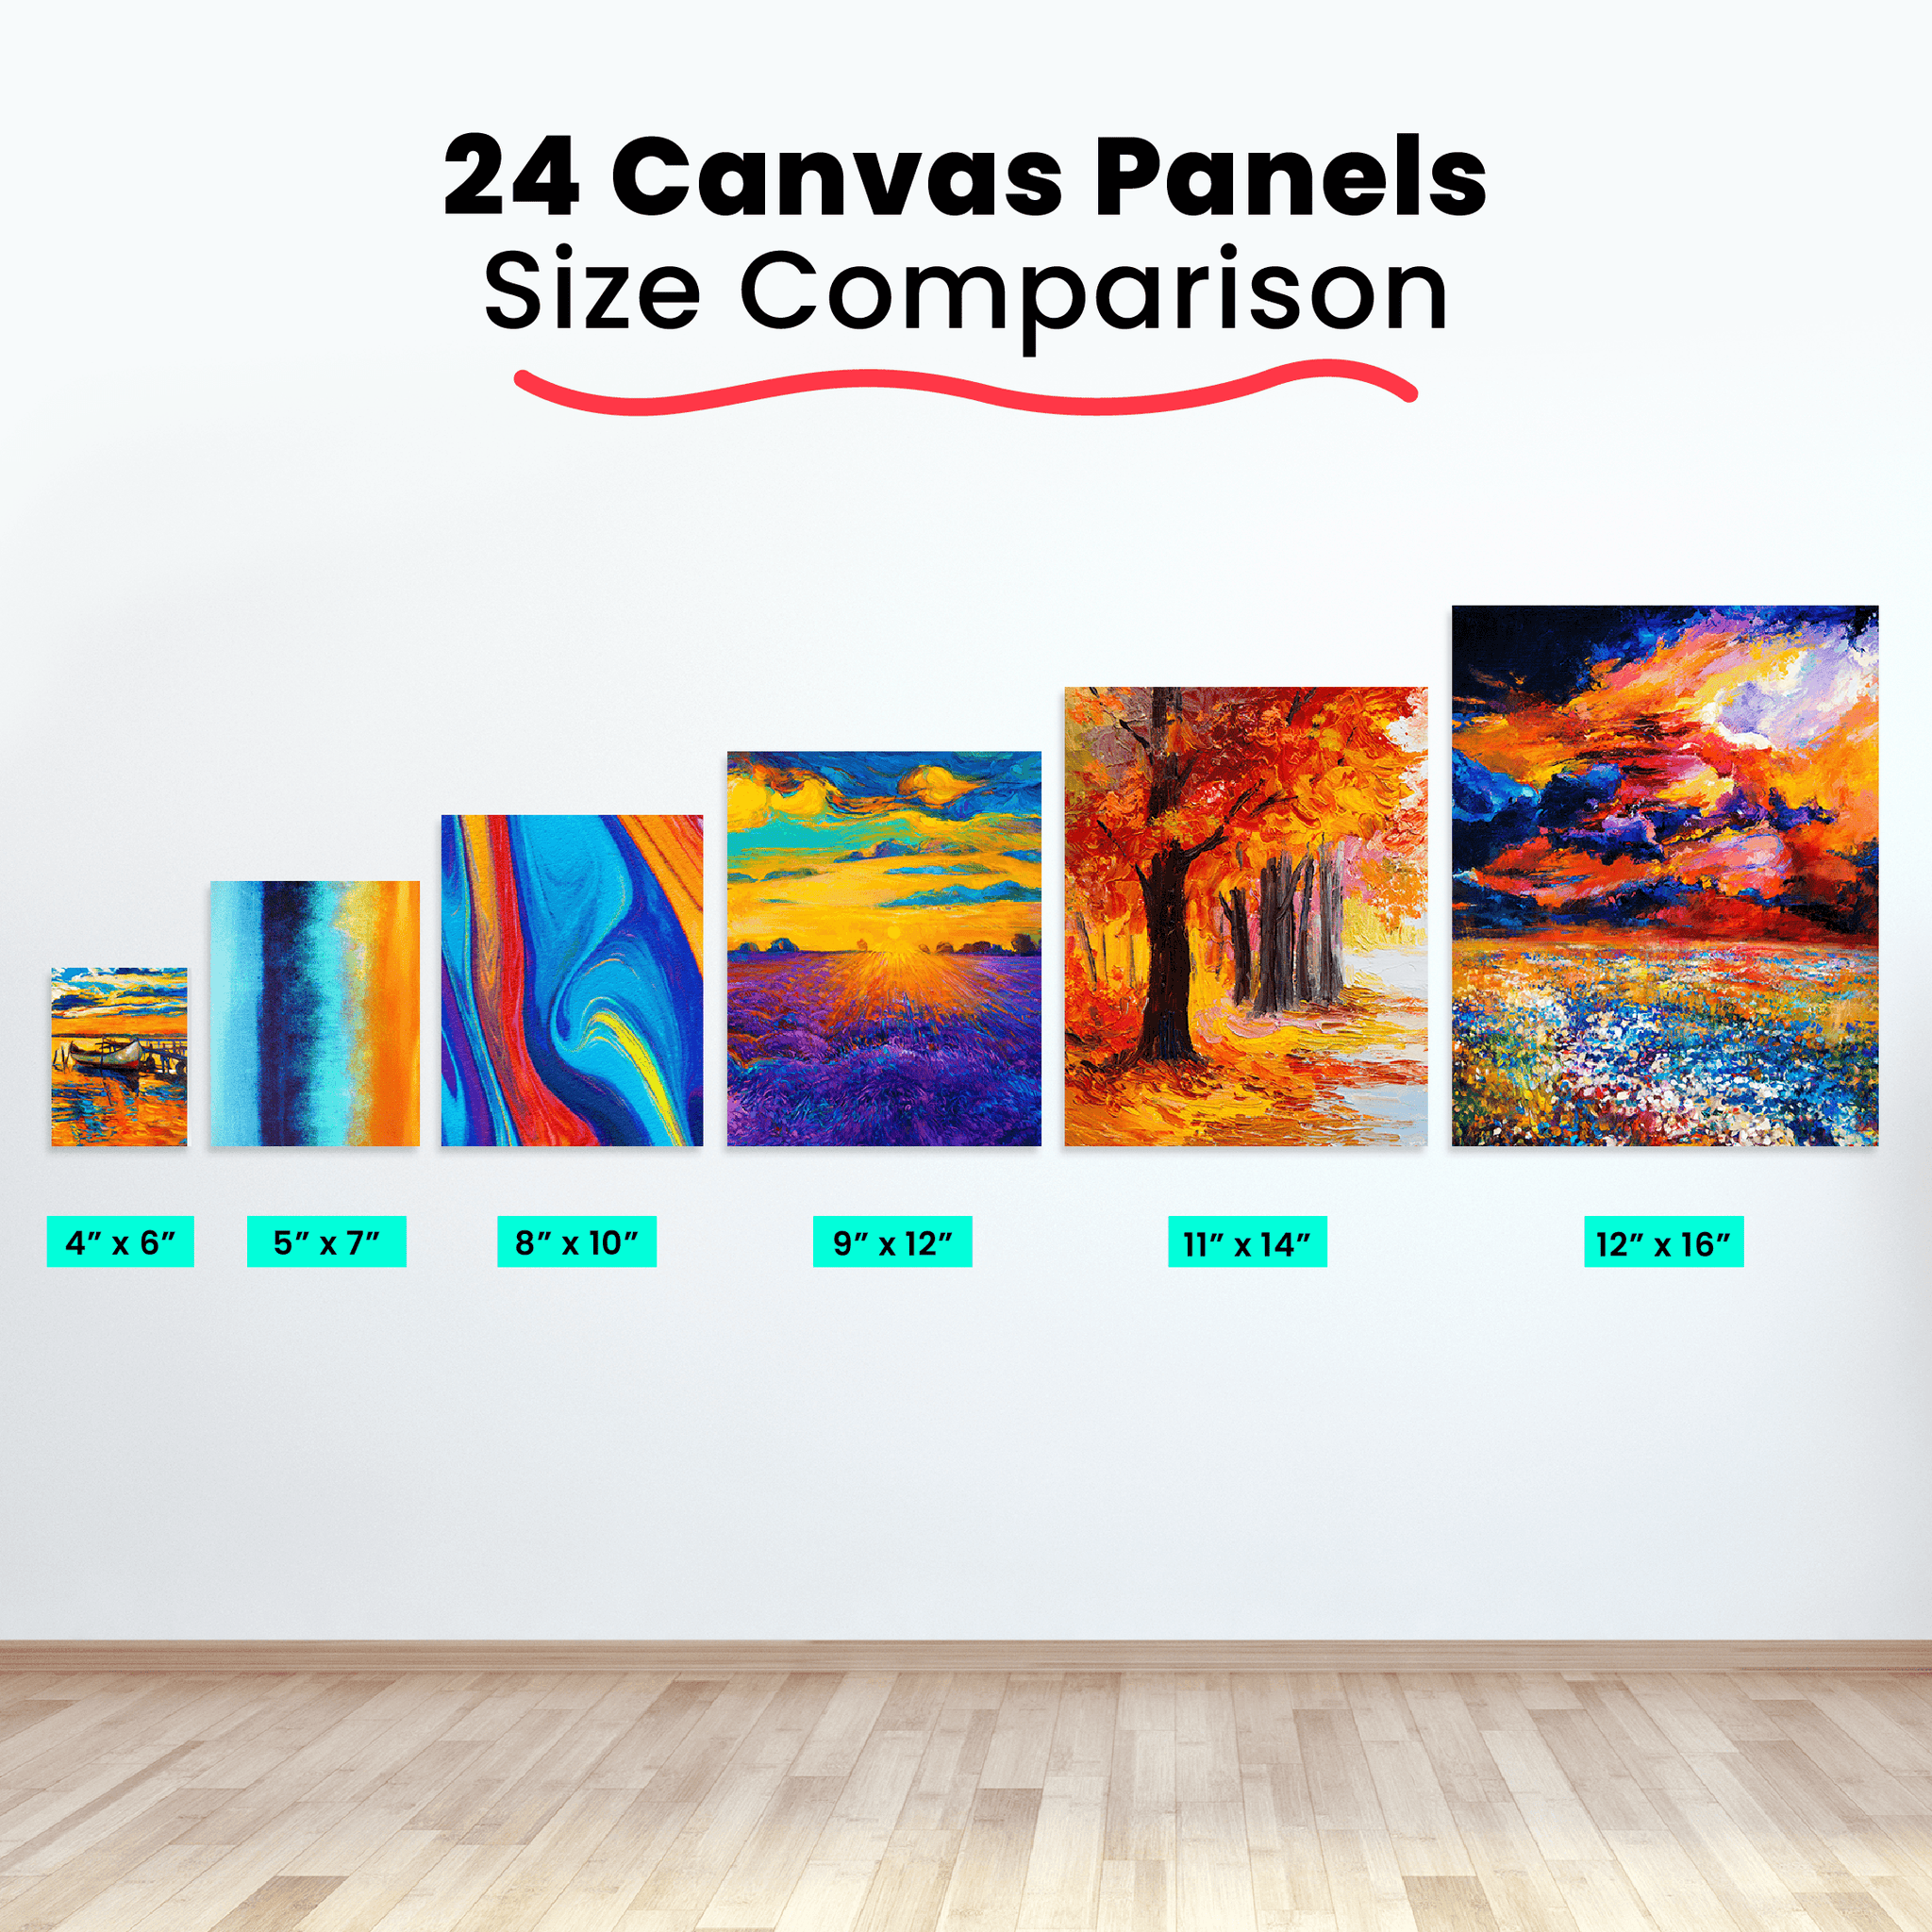 Canvas Boards, Canvas Panels